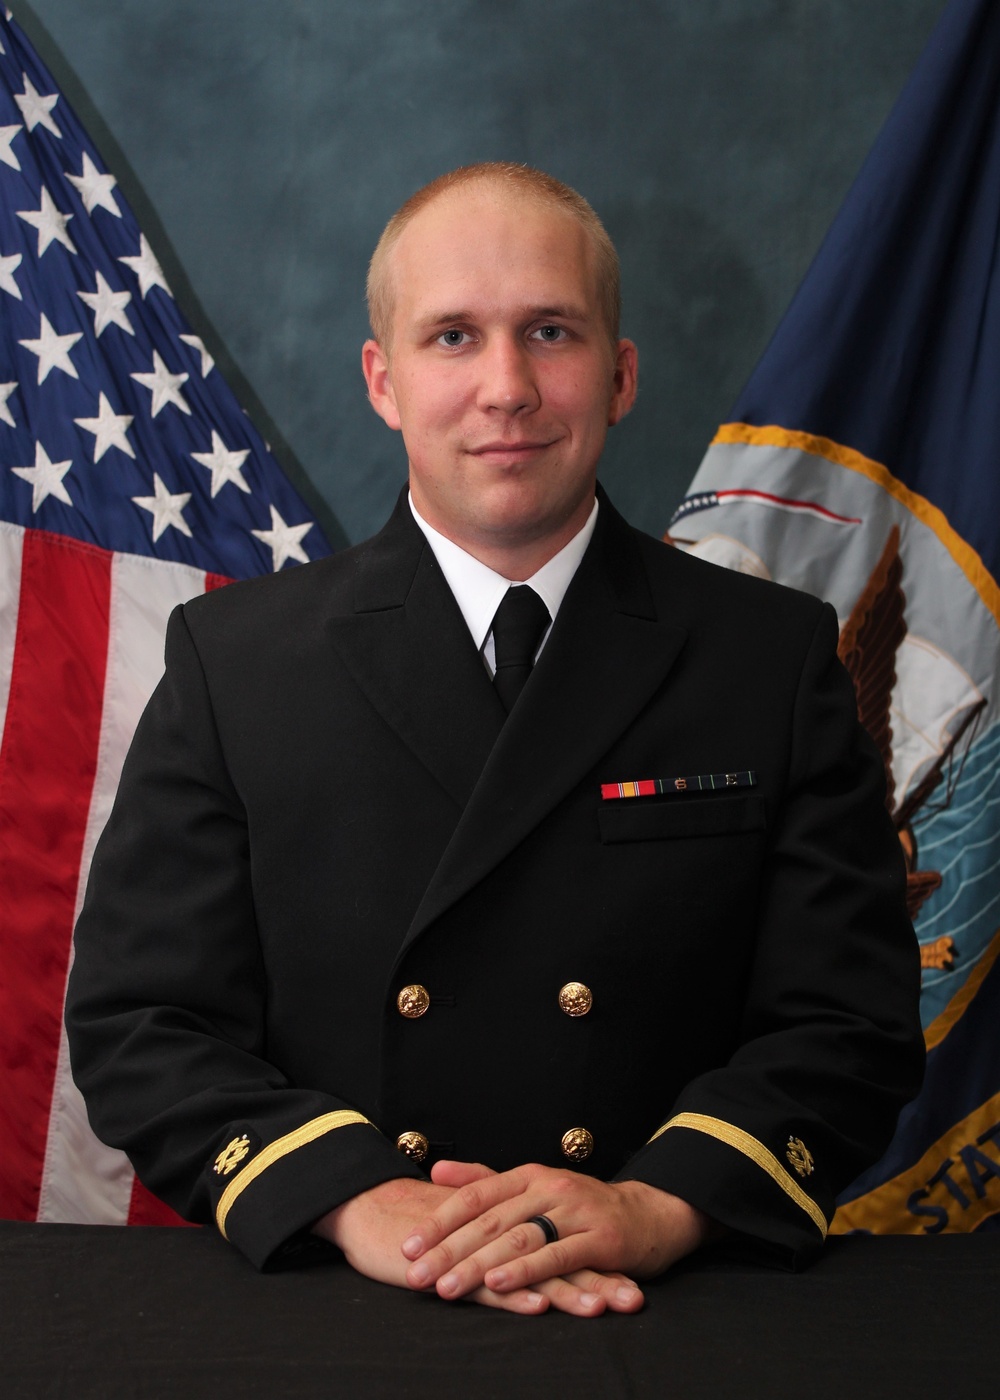 Cleveland Native Prepares to Serve as Navy Civil Engineer